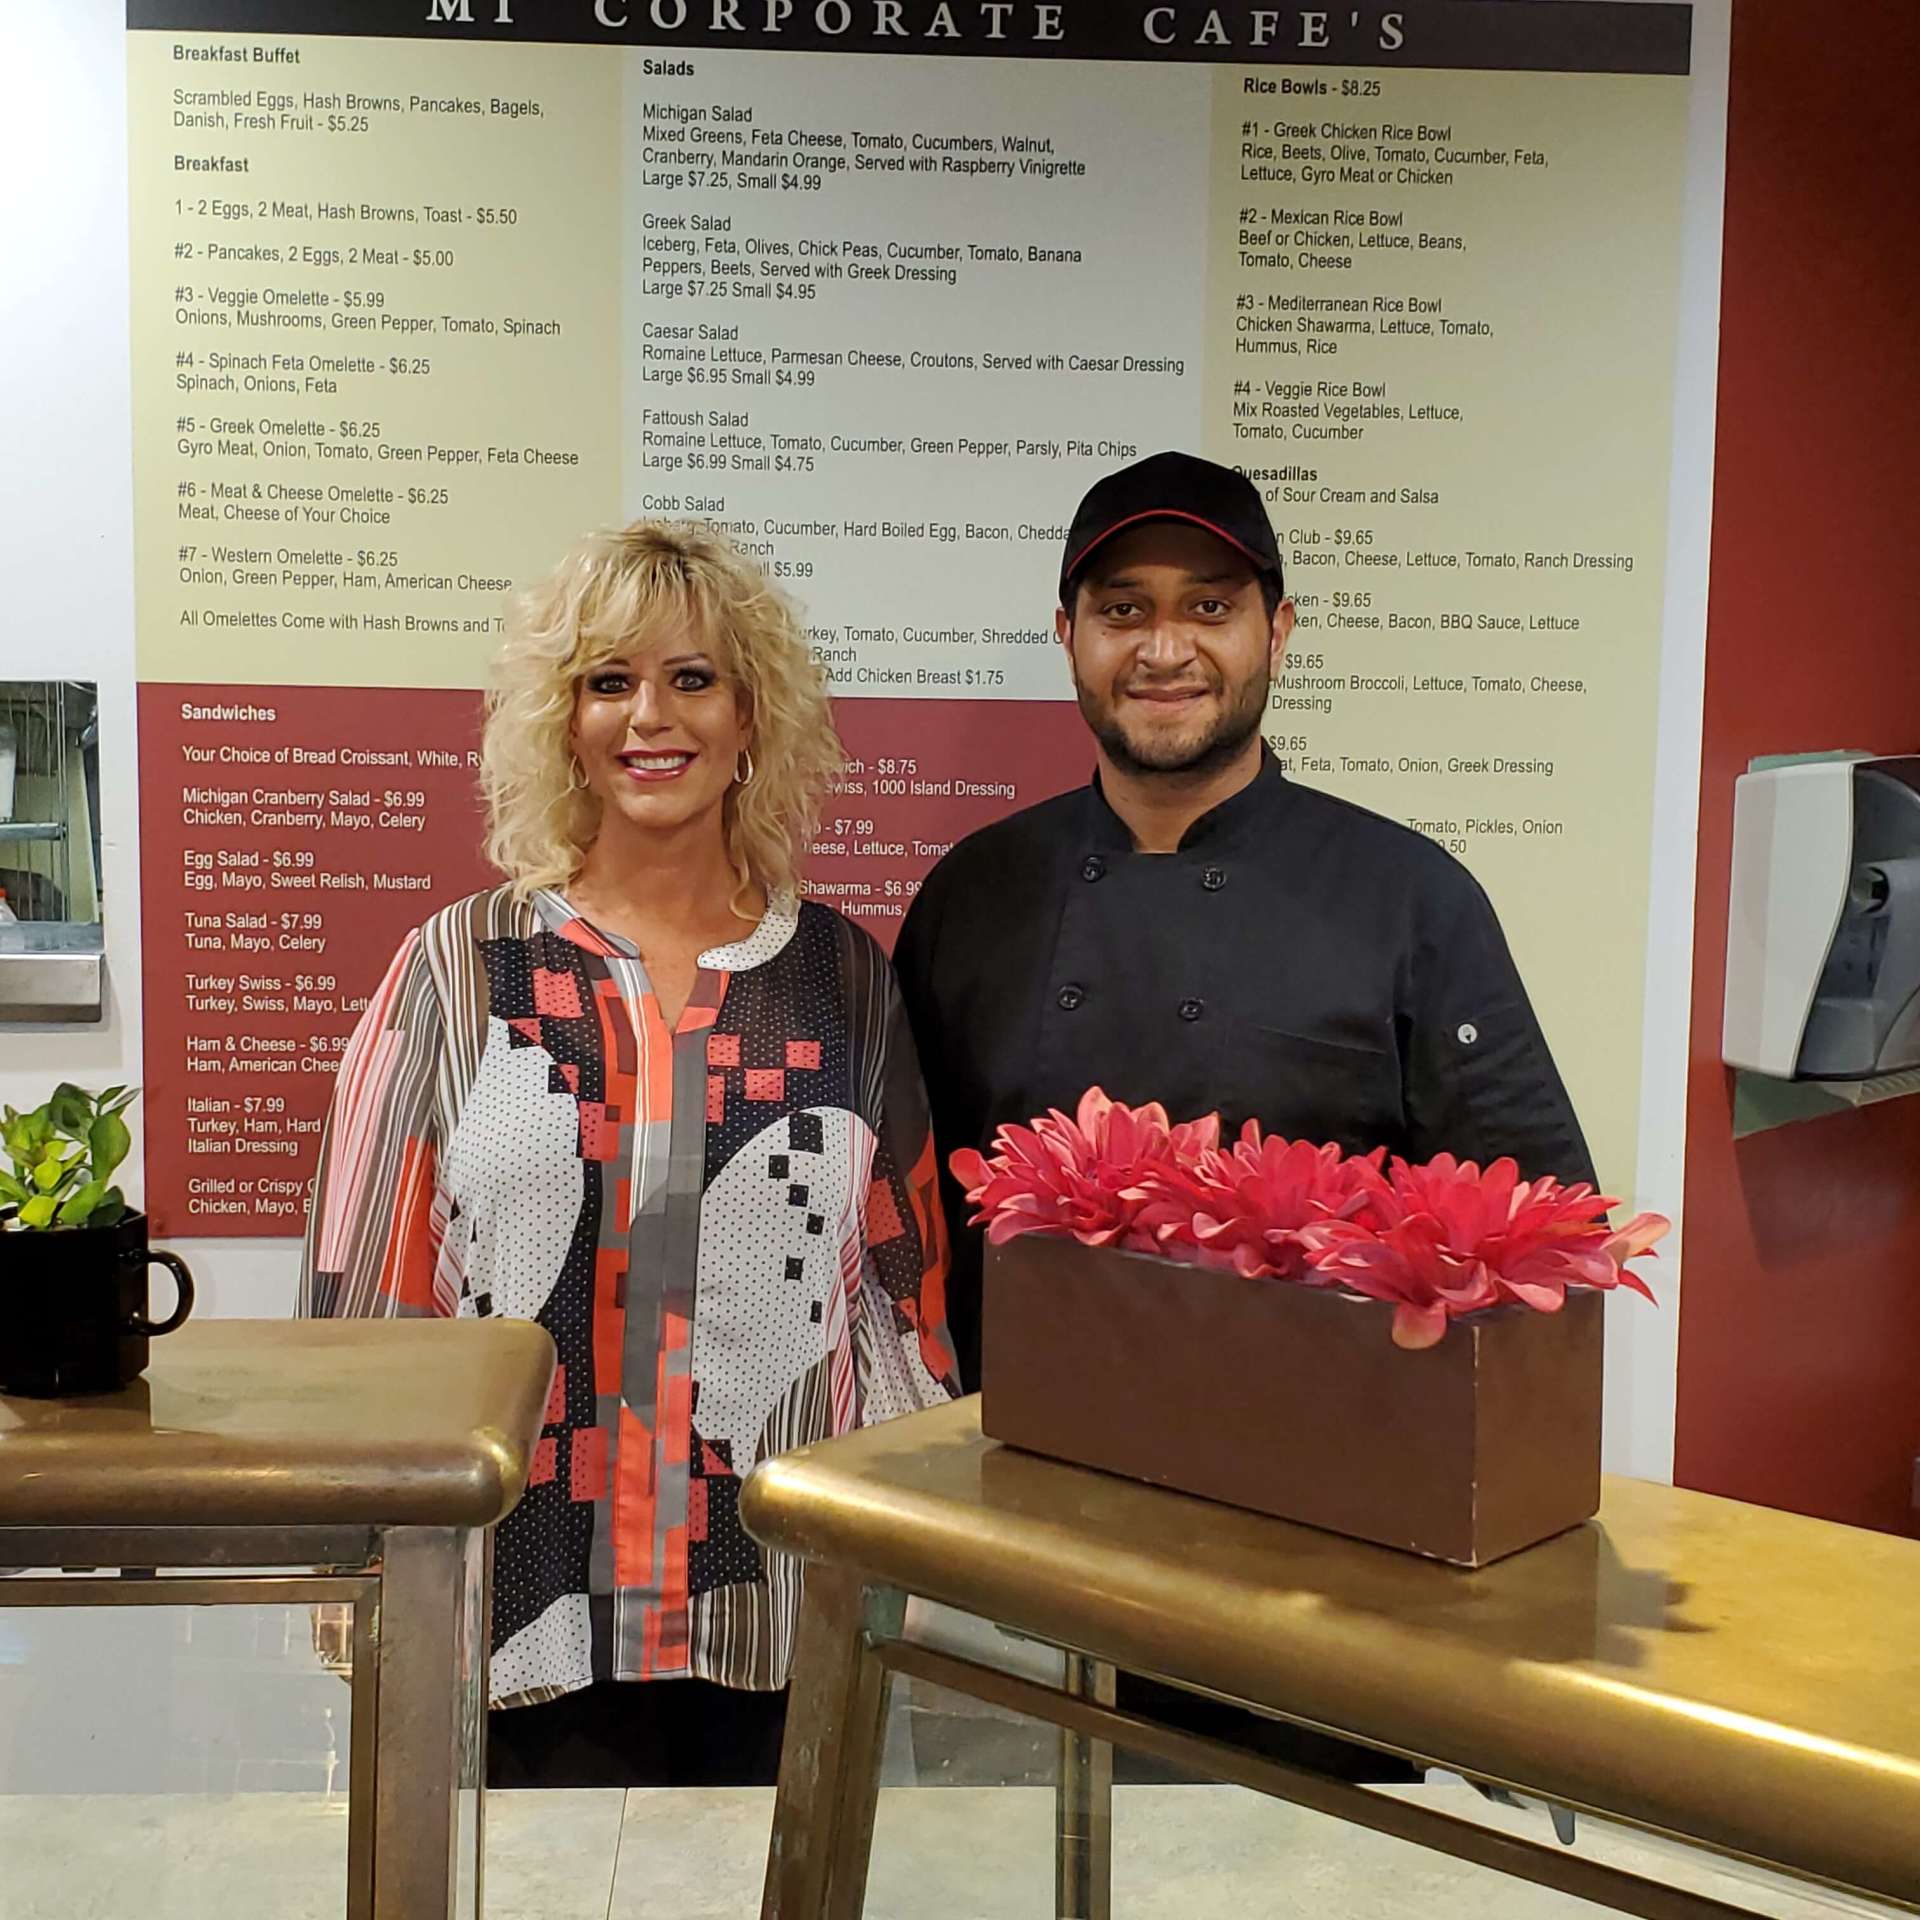 Kathy and Sam, Owners of MI Corporate Cafes in Bloomfield Hills, MI